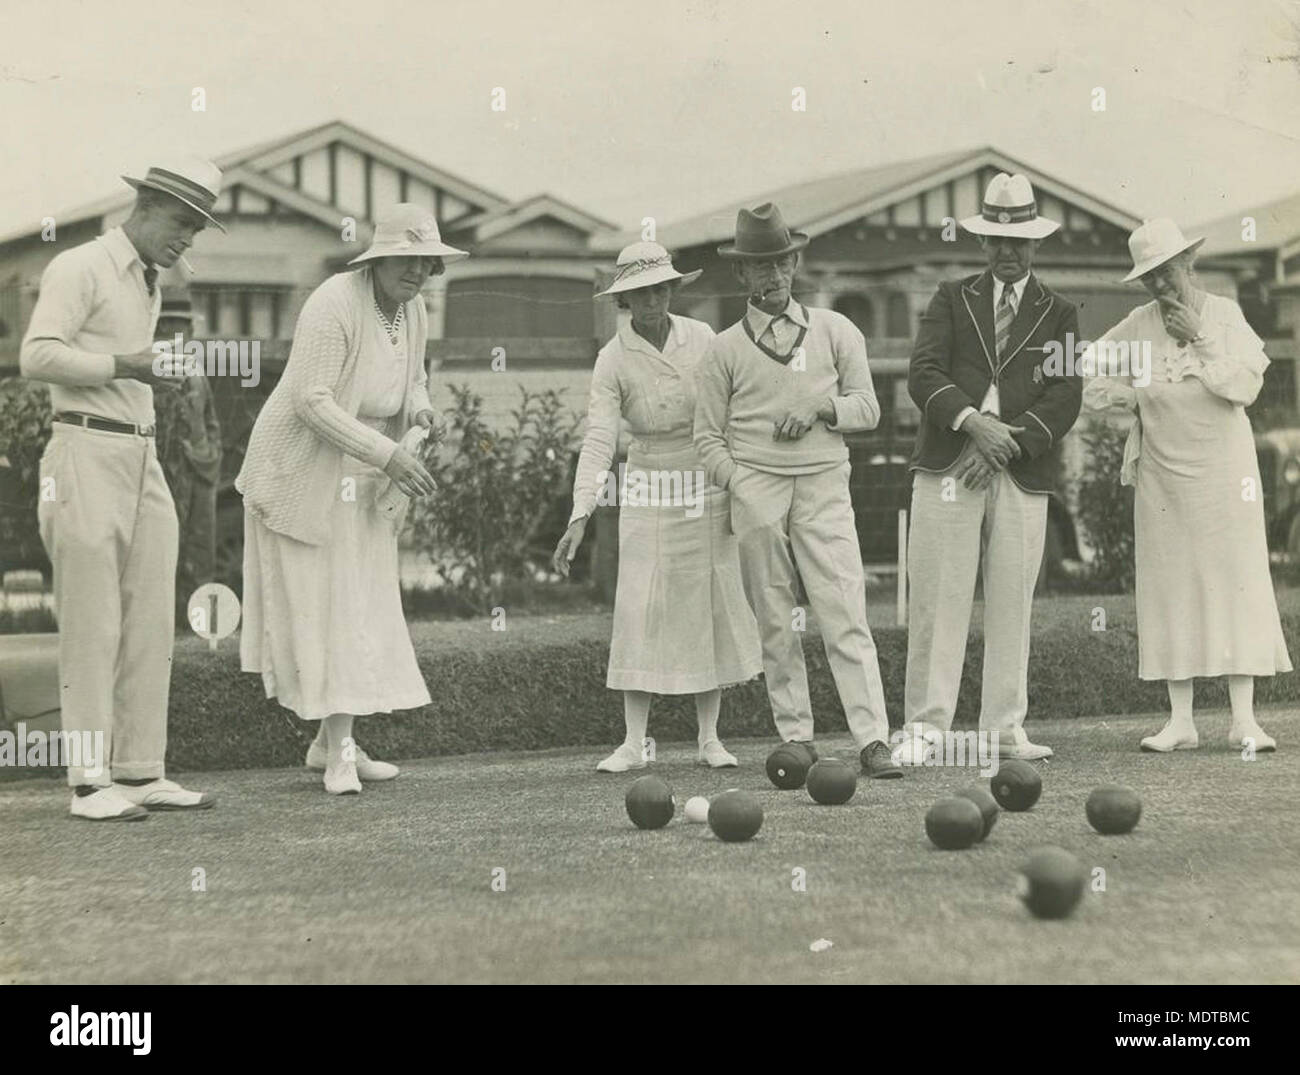 Mixed bowling at the opening day of the Kedron Ladies. Location: Brisbane, Queensland, Australia  Date: Undated  Description: Gentlemen bowlers were invited to the opening to help make up numbers. Stock Photo